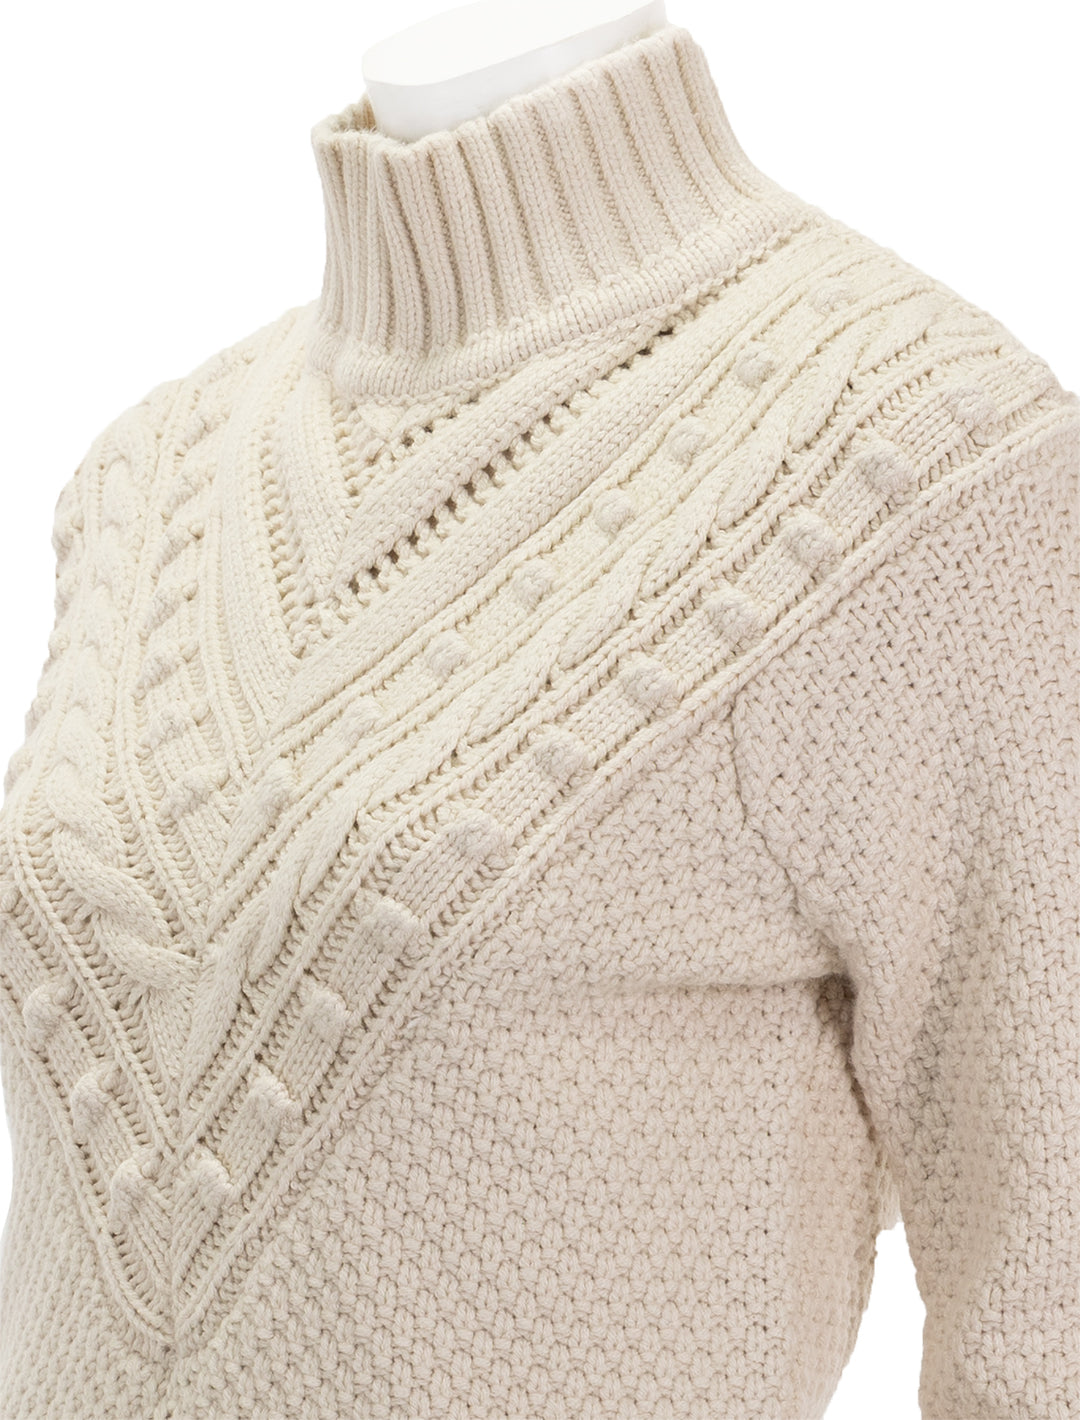 Close-up view of Splendid's maggie turtleneck sweater in white sand.